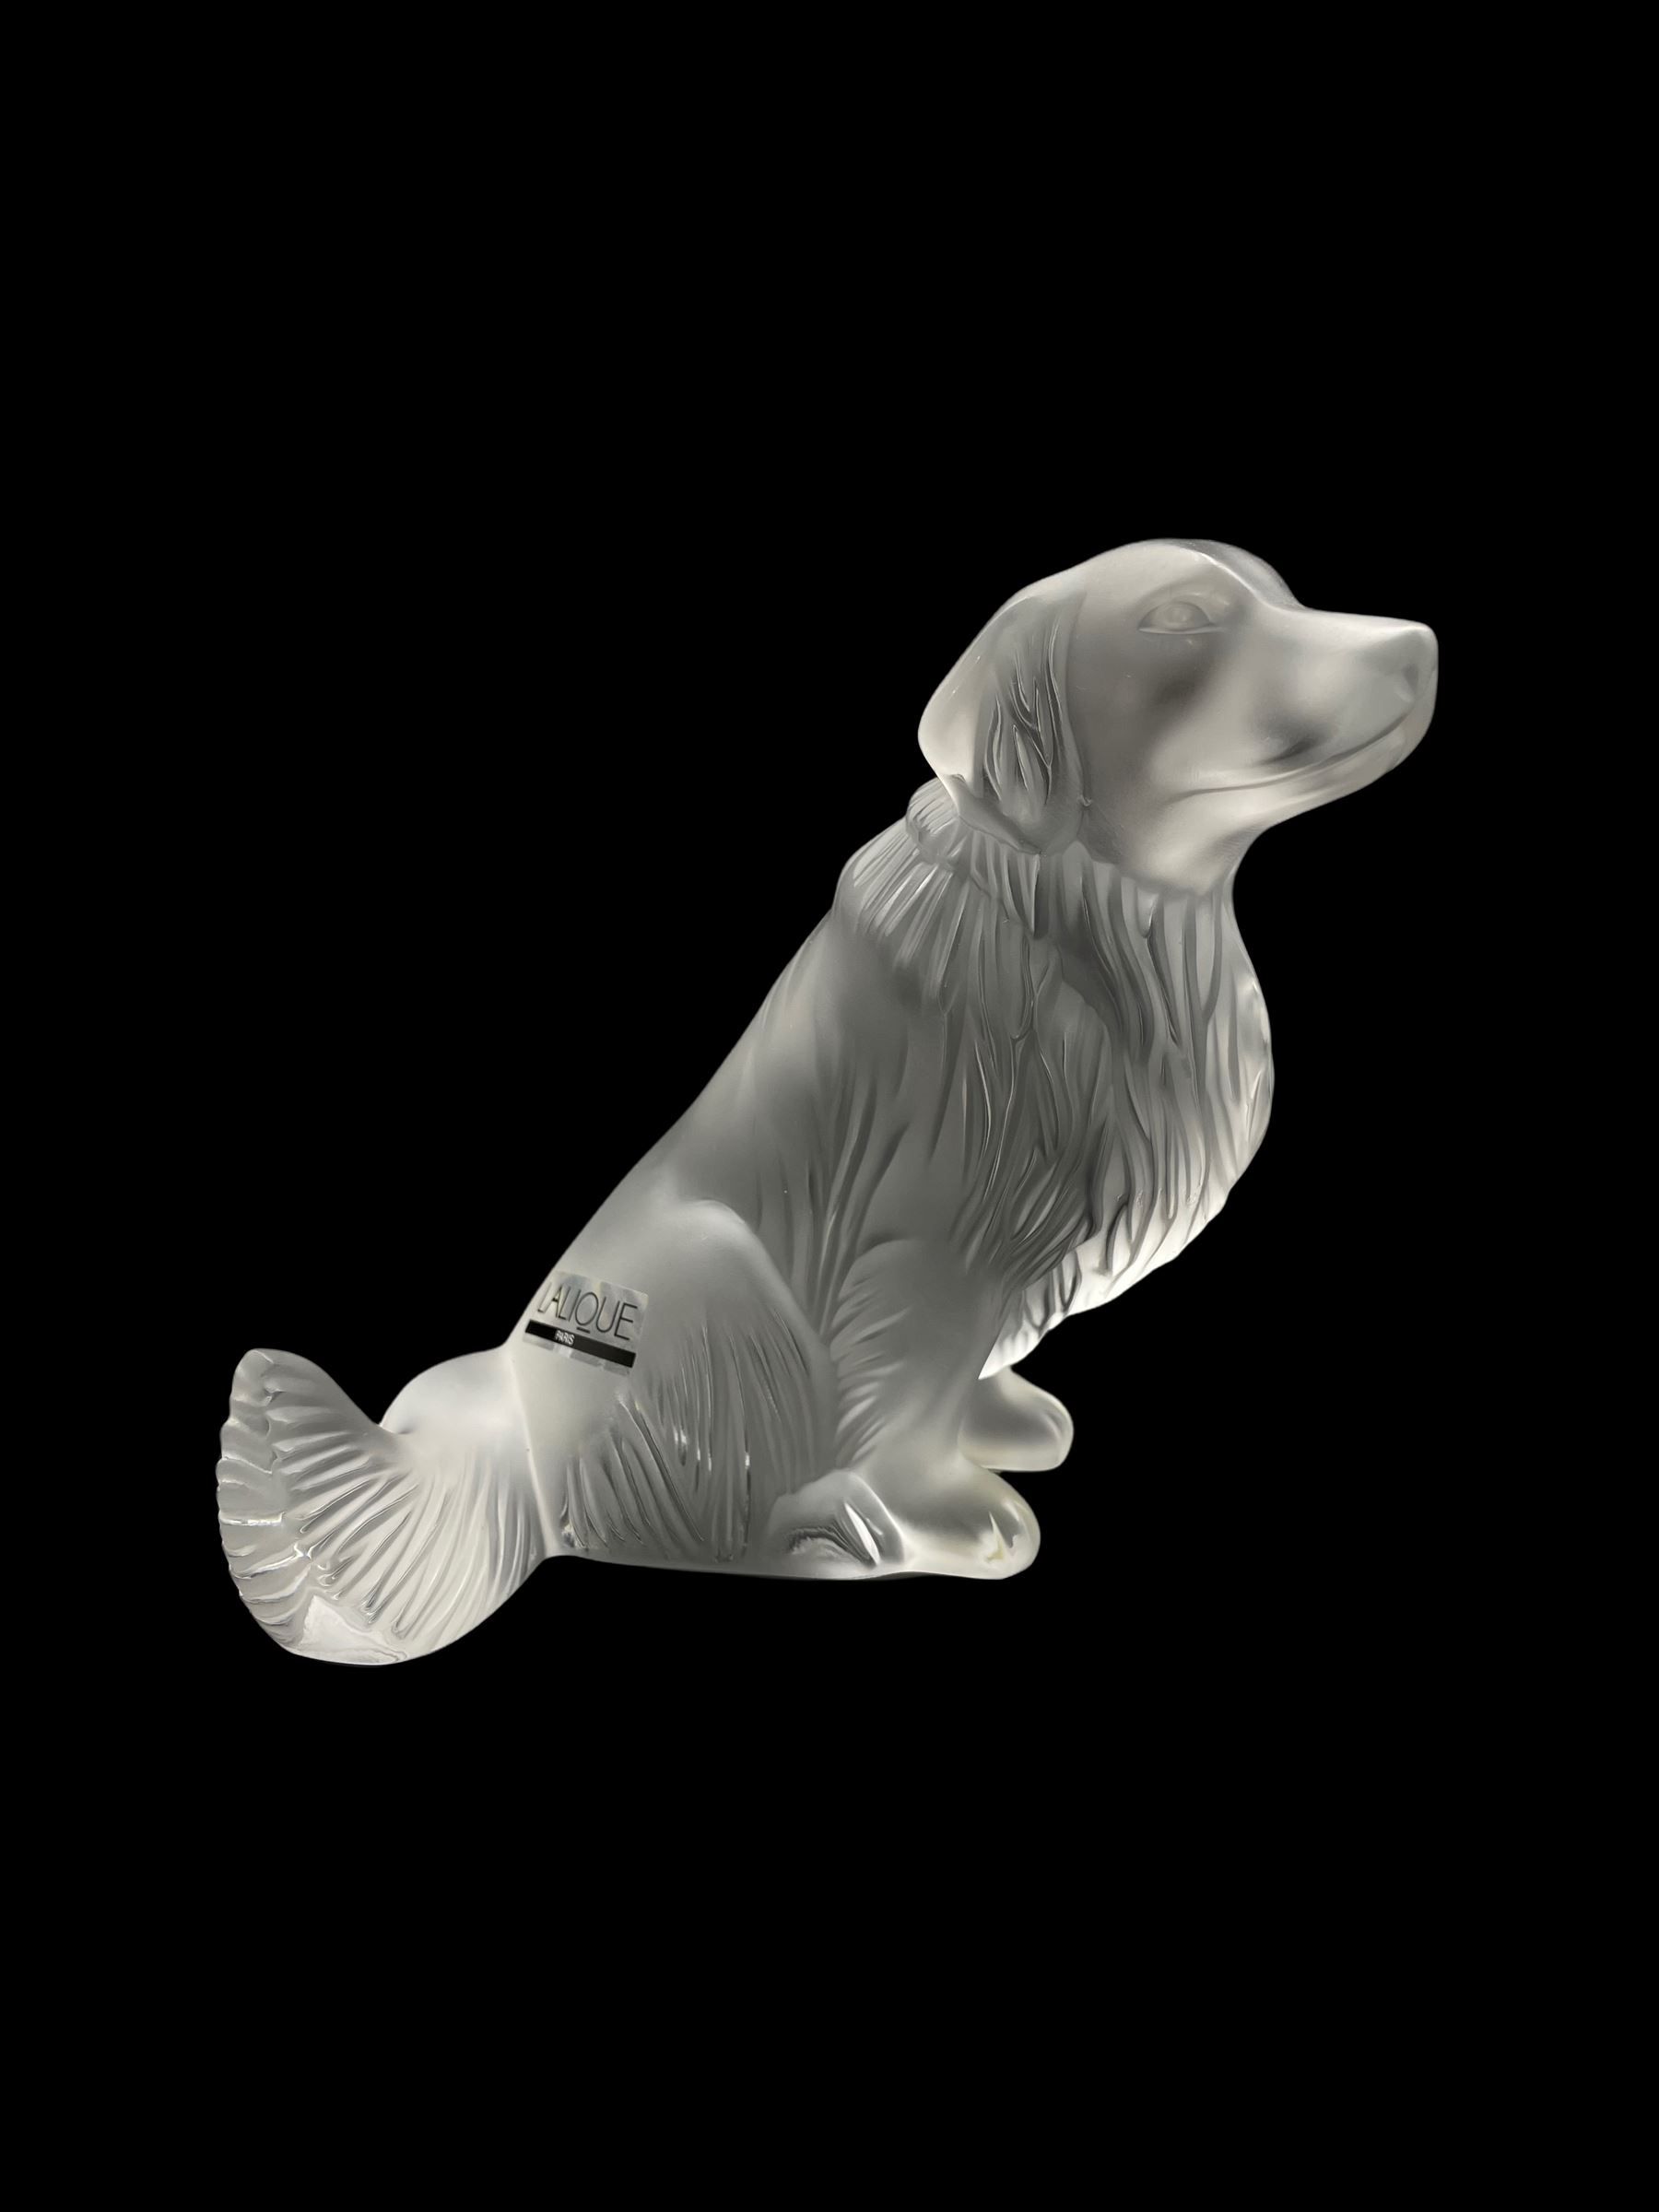 Lalique frosted glass model of a Golden Retriever